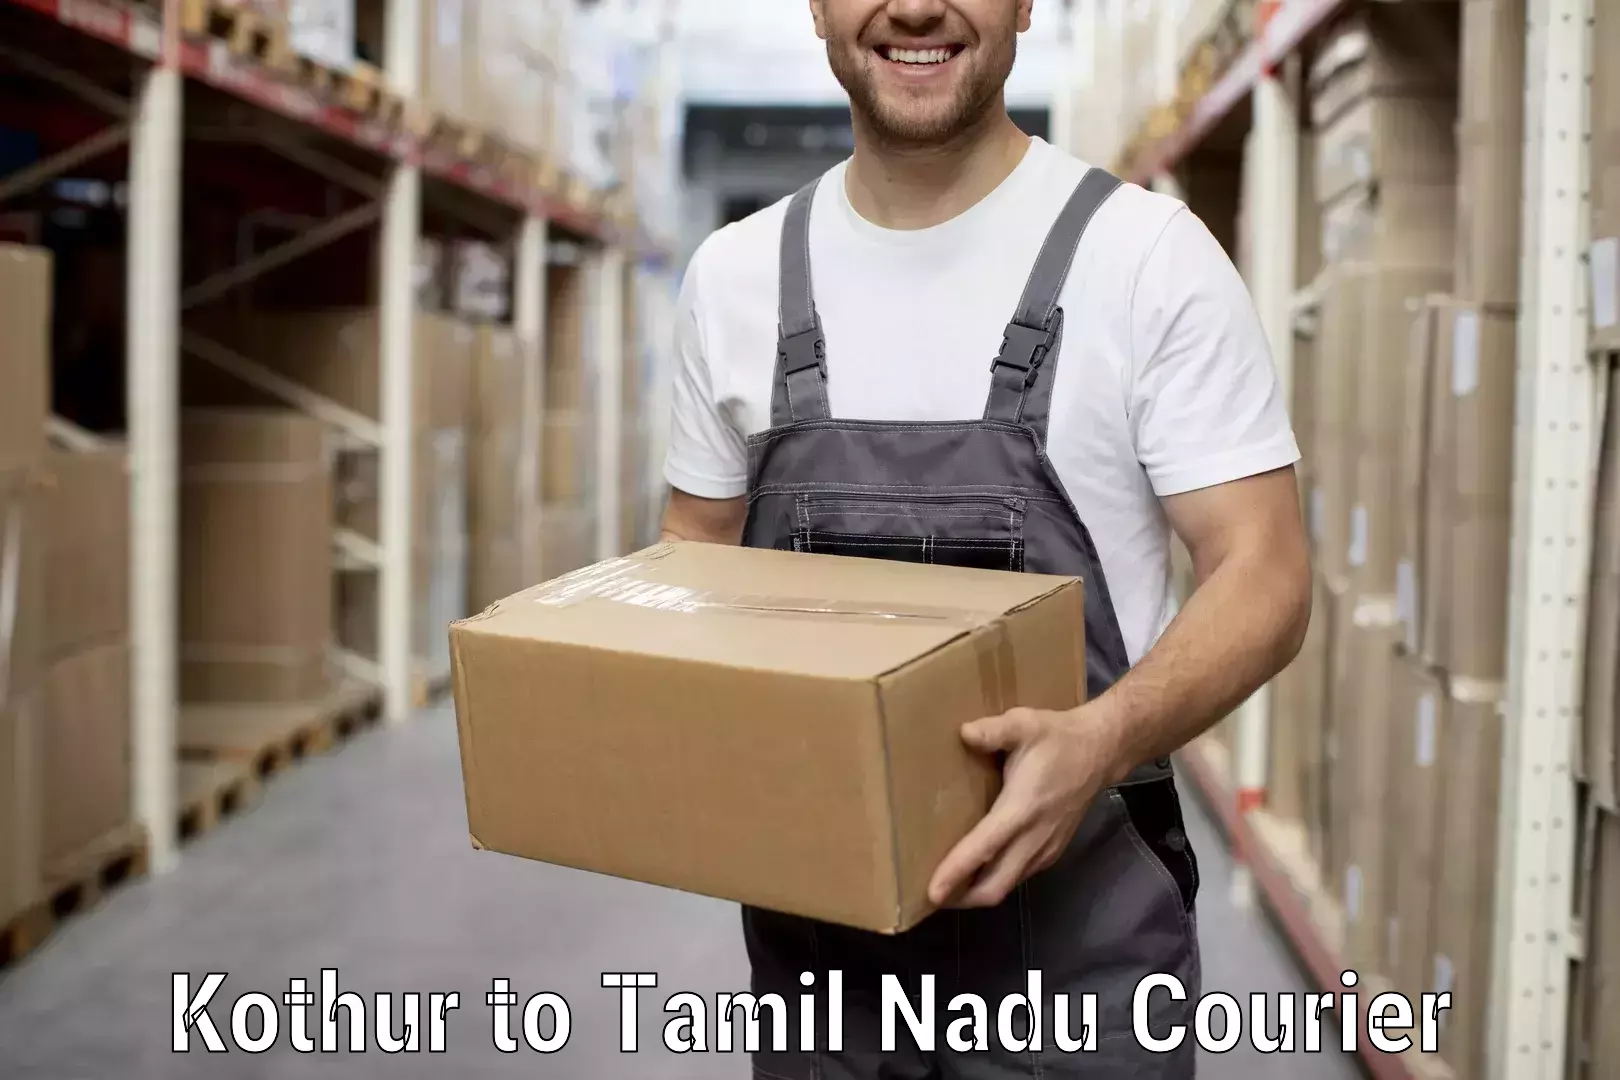 Professional furniture movers in Kothur to Tamil Nadu